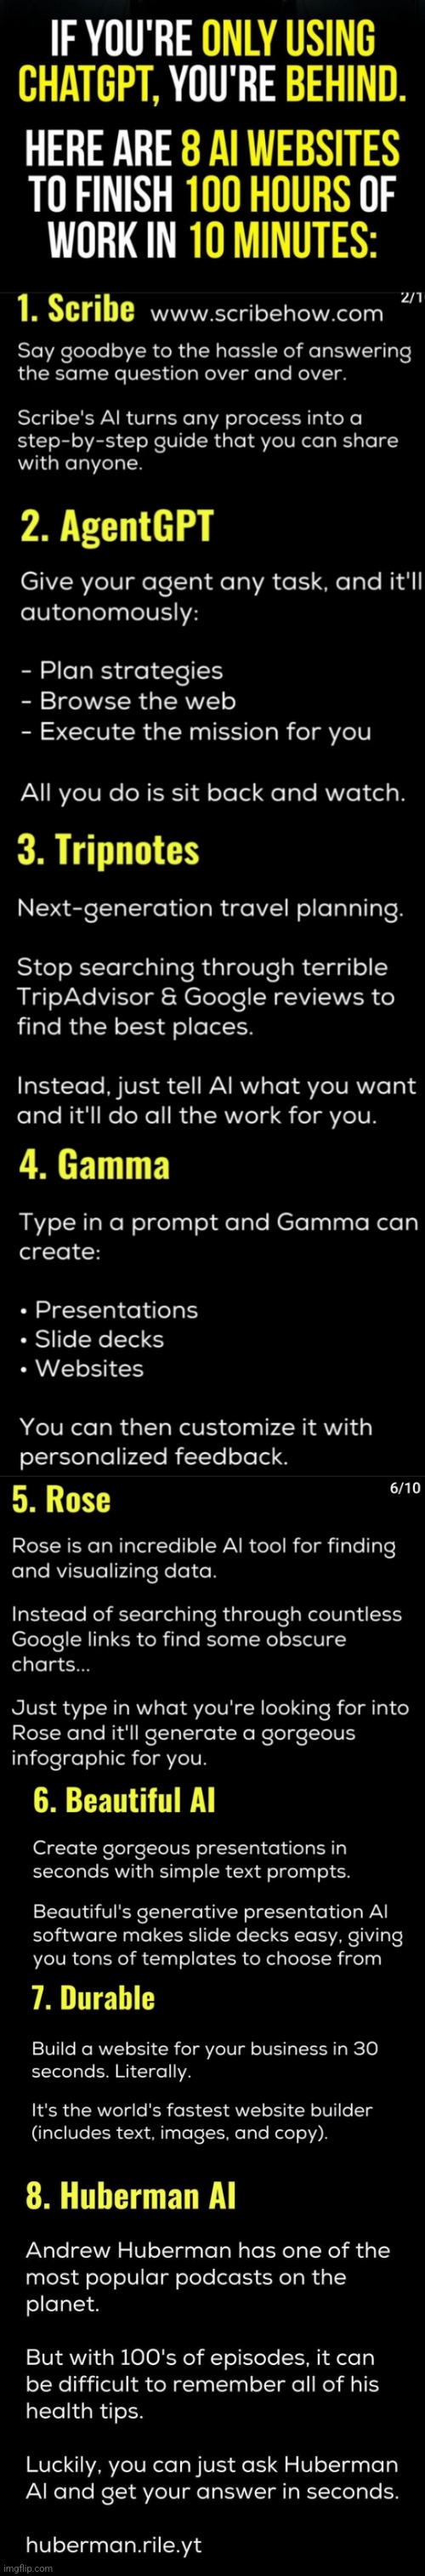 8 A.I. Websites To Do 100 Hours Of Work In 10 Minutes :> | image tagged in simothefinlandized,artificial intelligence,websites,work,school,infographics | made w/ Imgflip meme maker